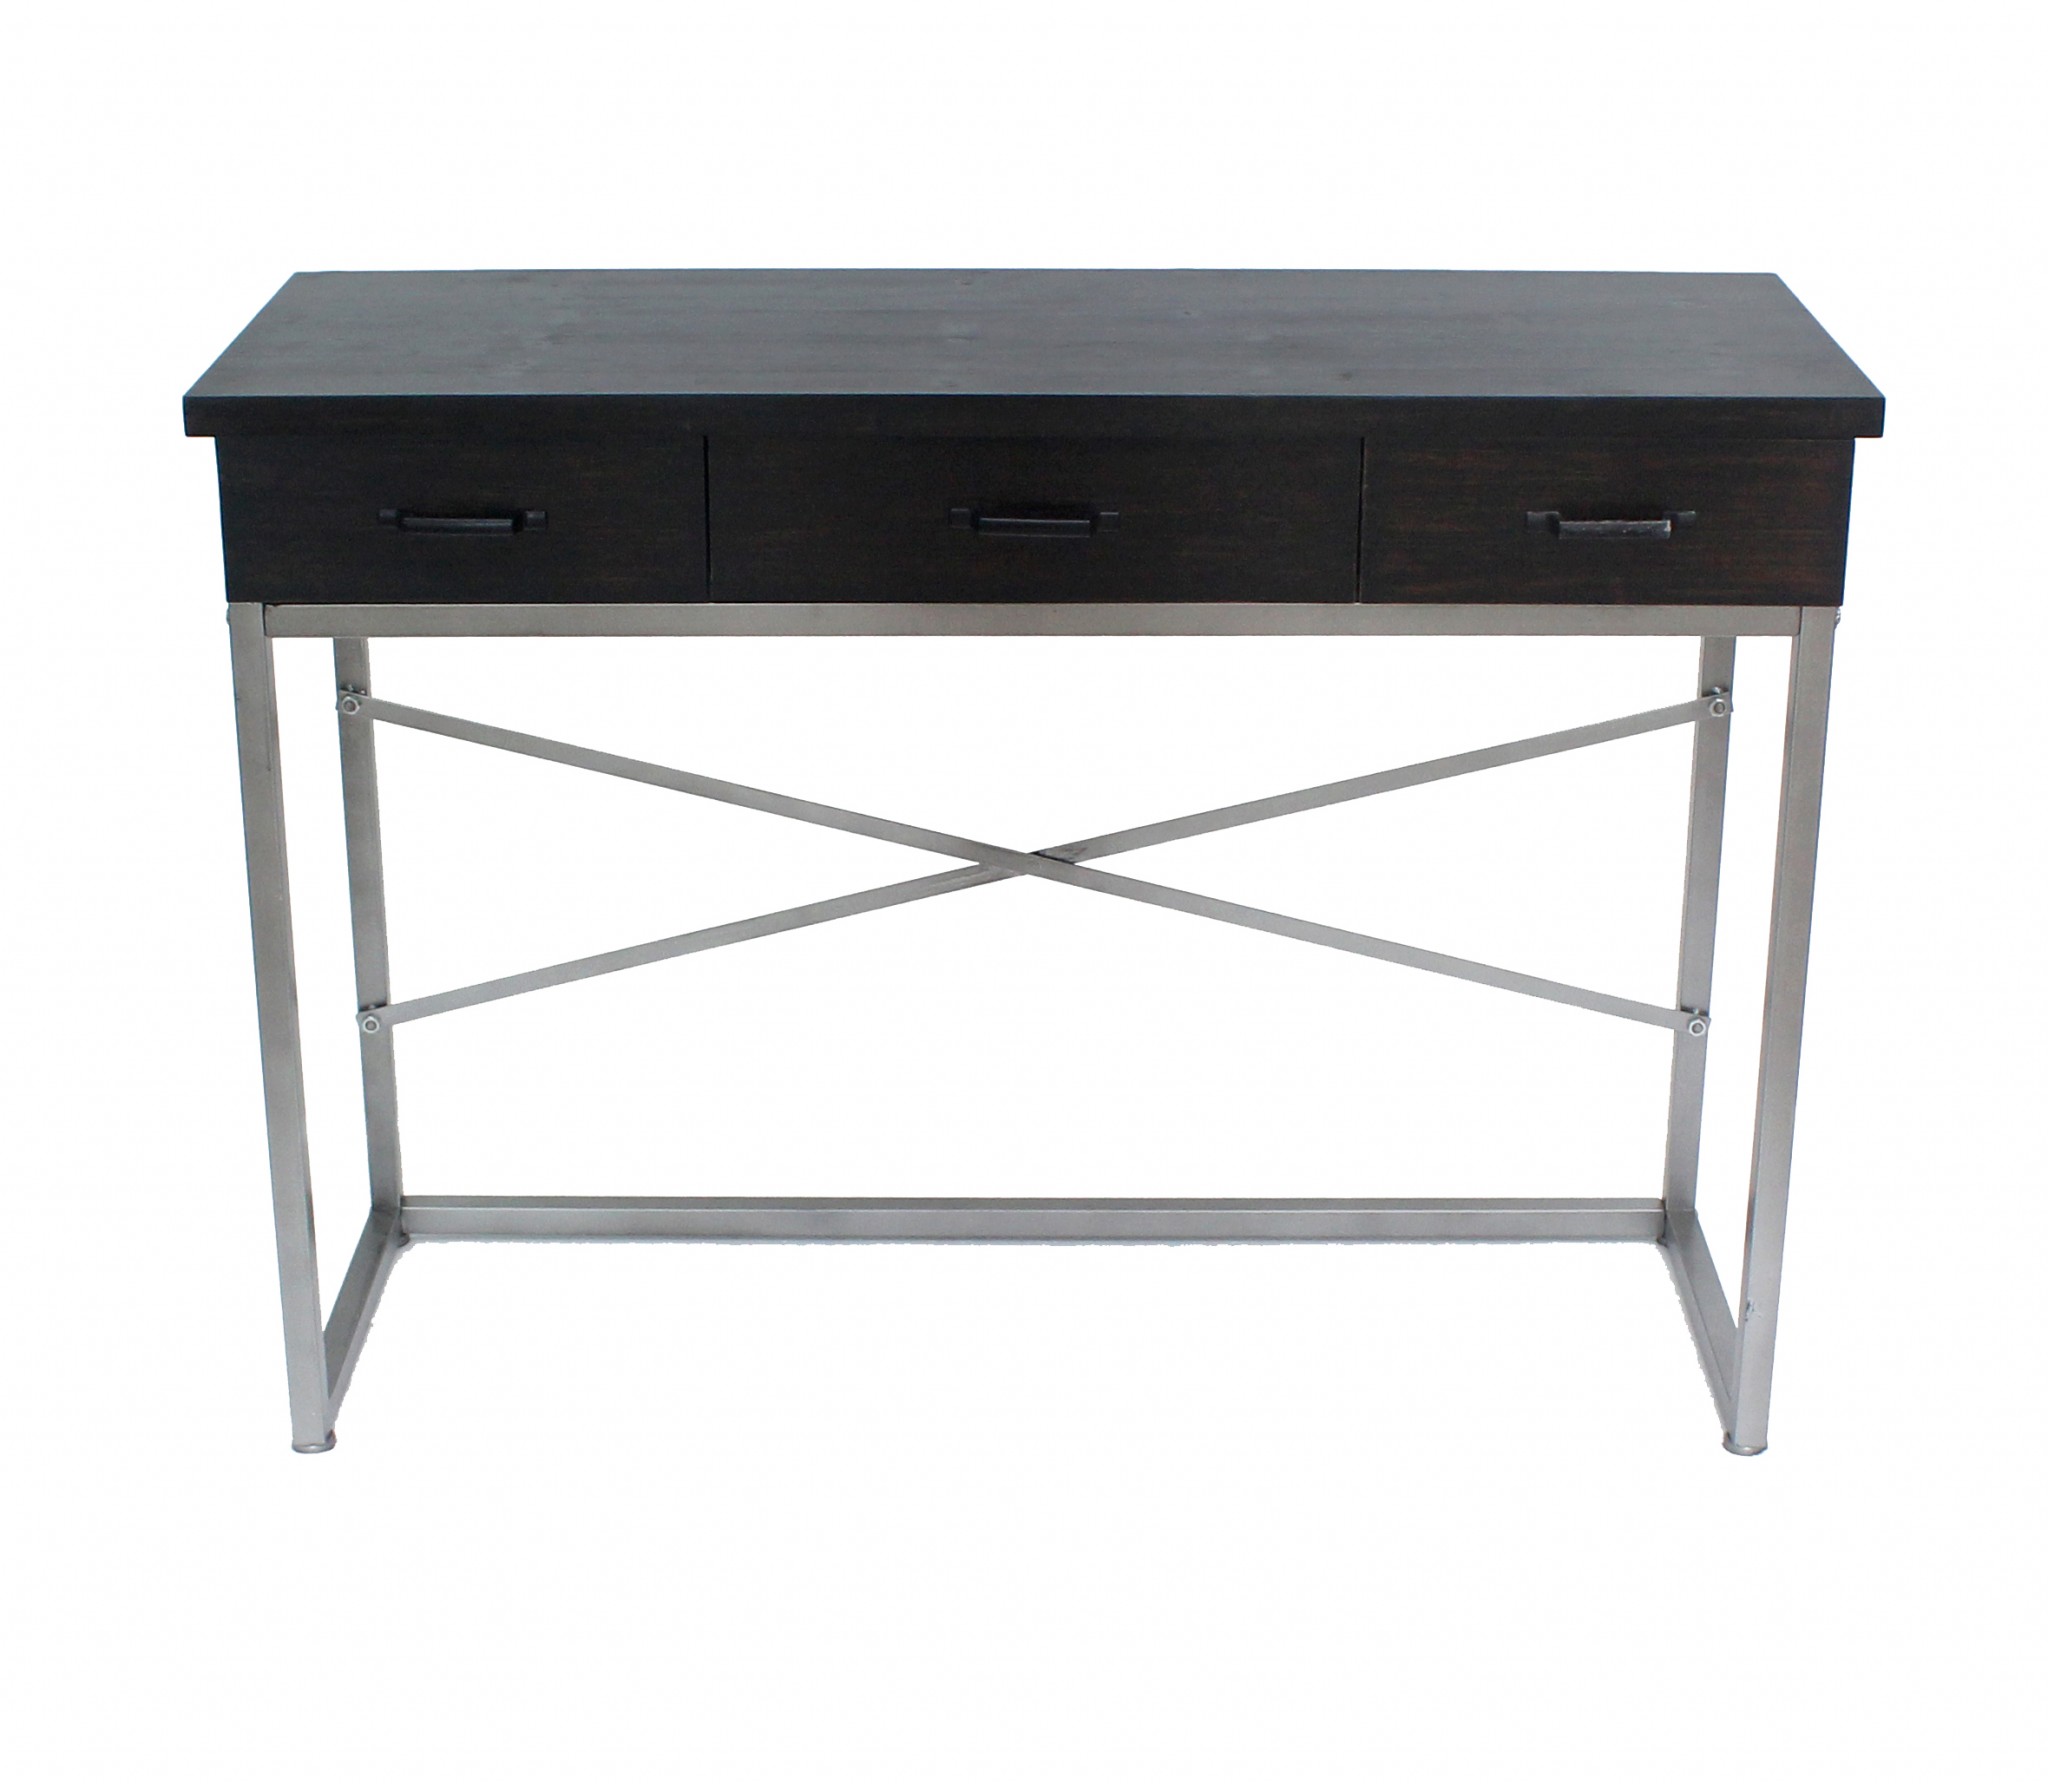 16" x 45" x 32" Charcoal 3 Drawer Console Table